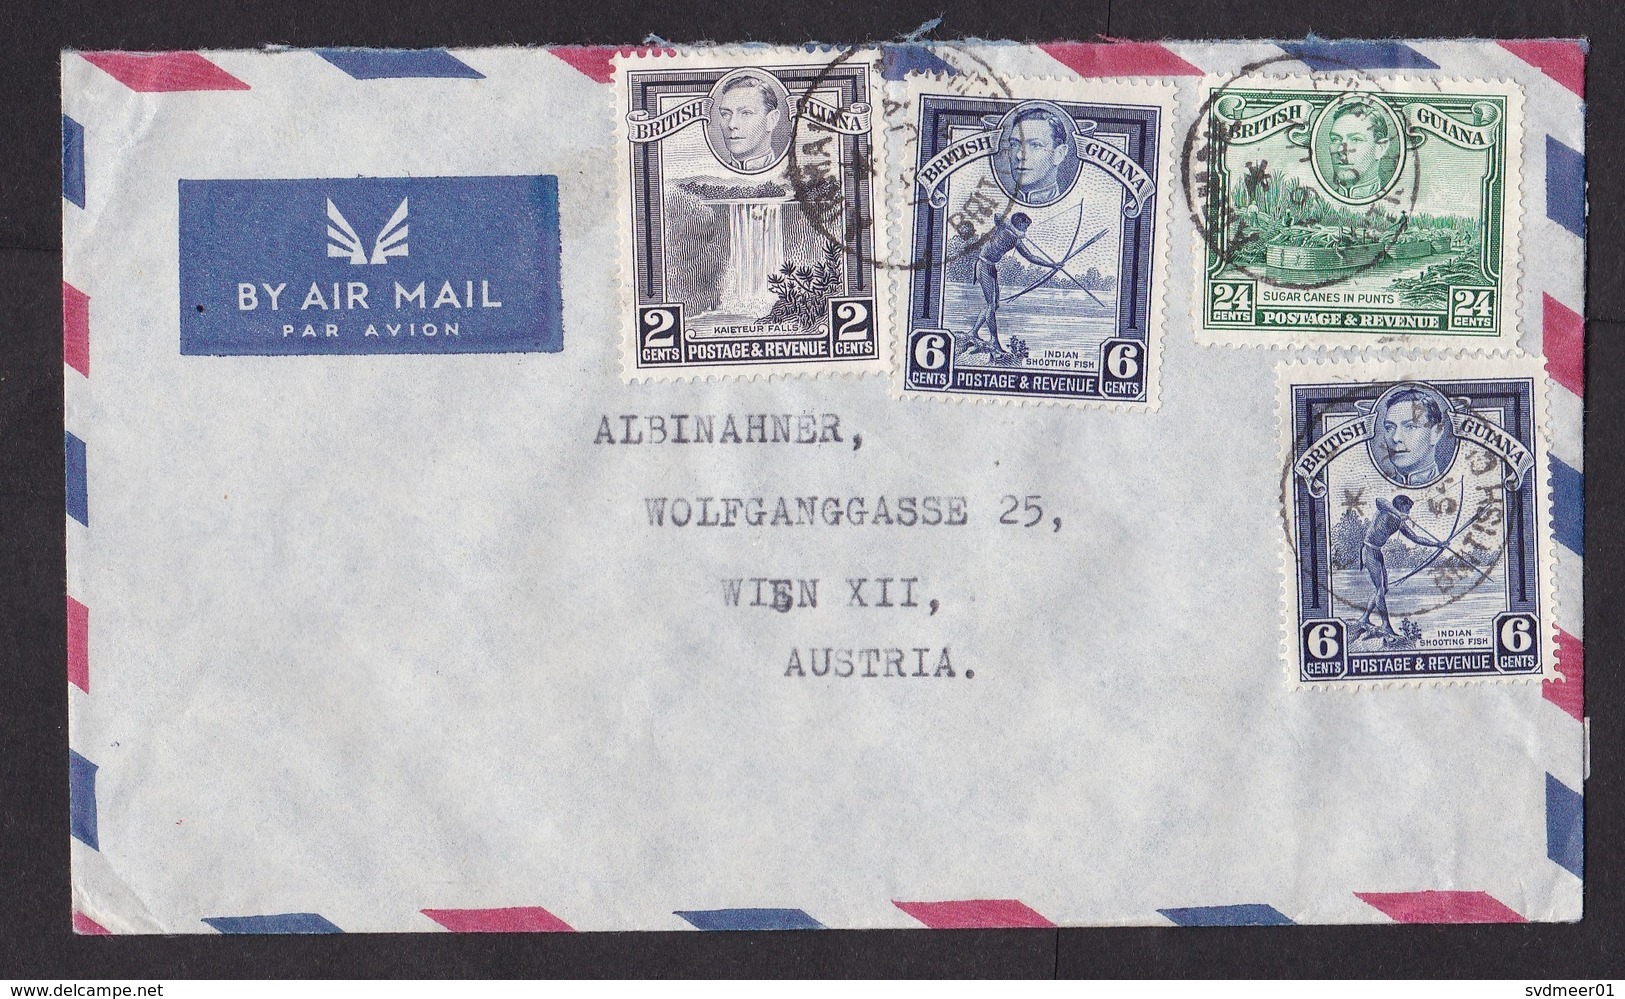 British Guiana: Airmail Cover To Austria, 1954, 4 Stamps, George VI, Waterfall, Fishing, Sugar Cane Ship (traces Of Use) - Britisch-Guayana (...-1966)